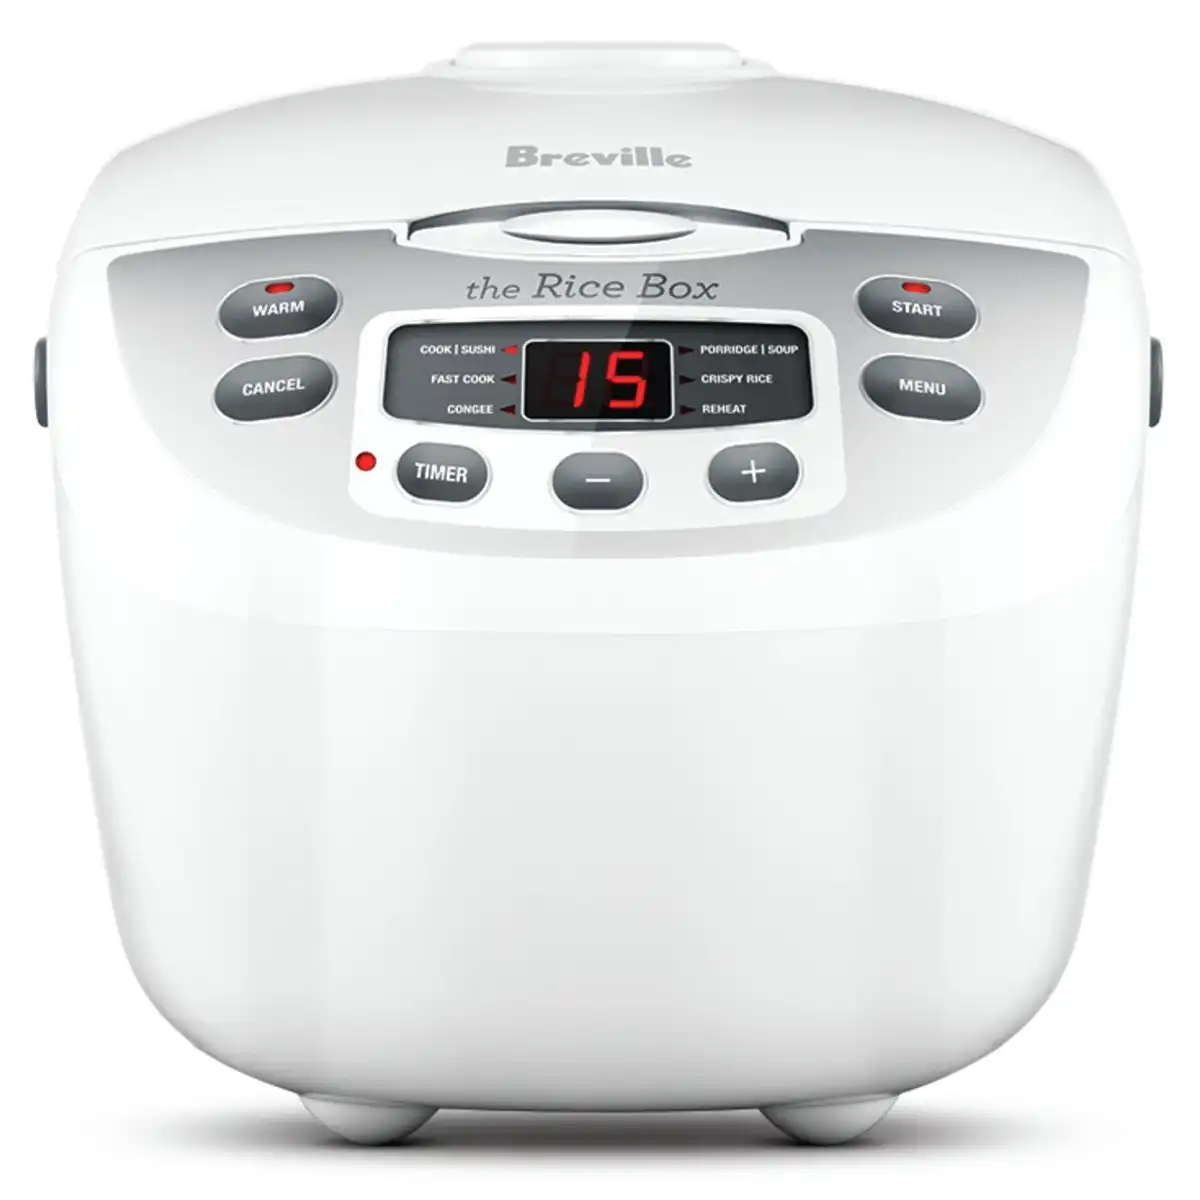 Breville the Rice Box Rice Cooker